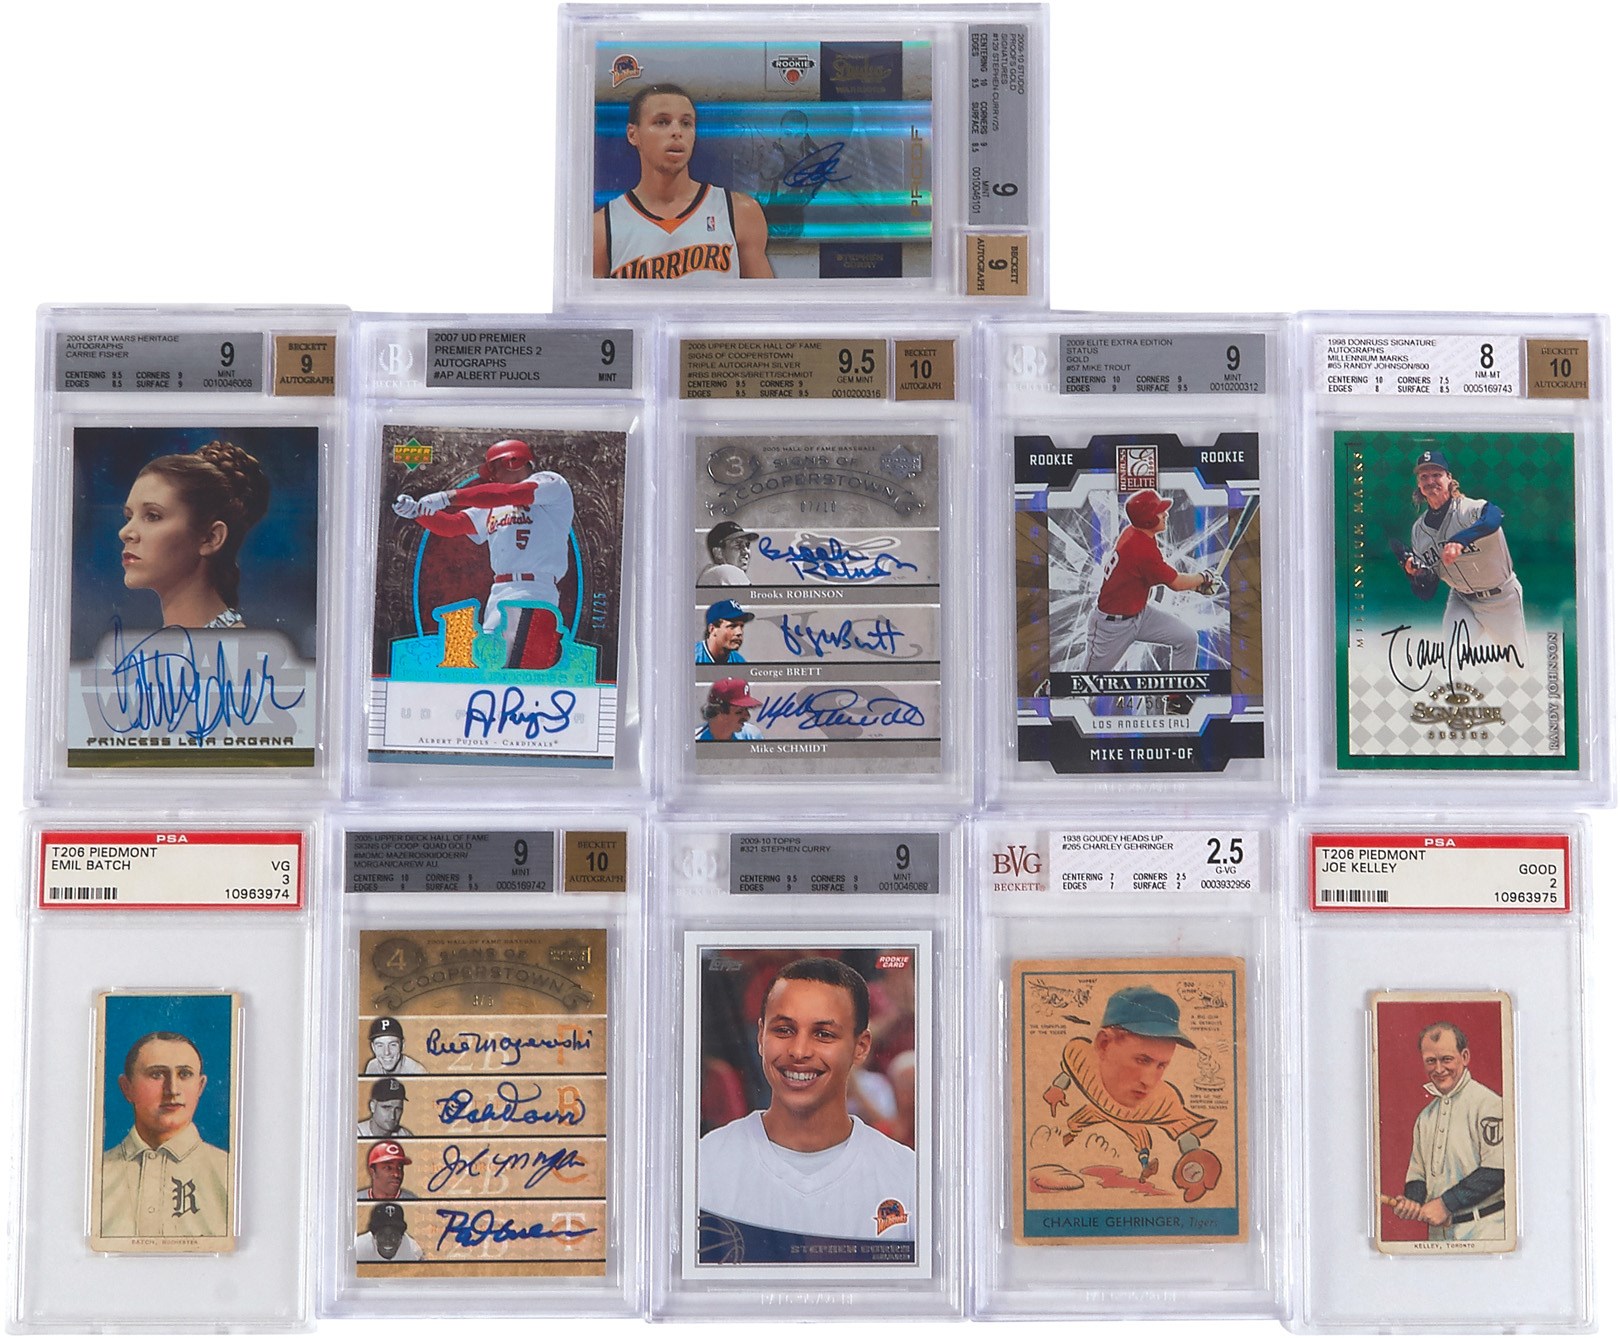 Baseball and Trading Cards - Modern & Vintage Autograph, Memorabilia and Rookie Collection w/Major Stars (70+)